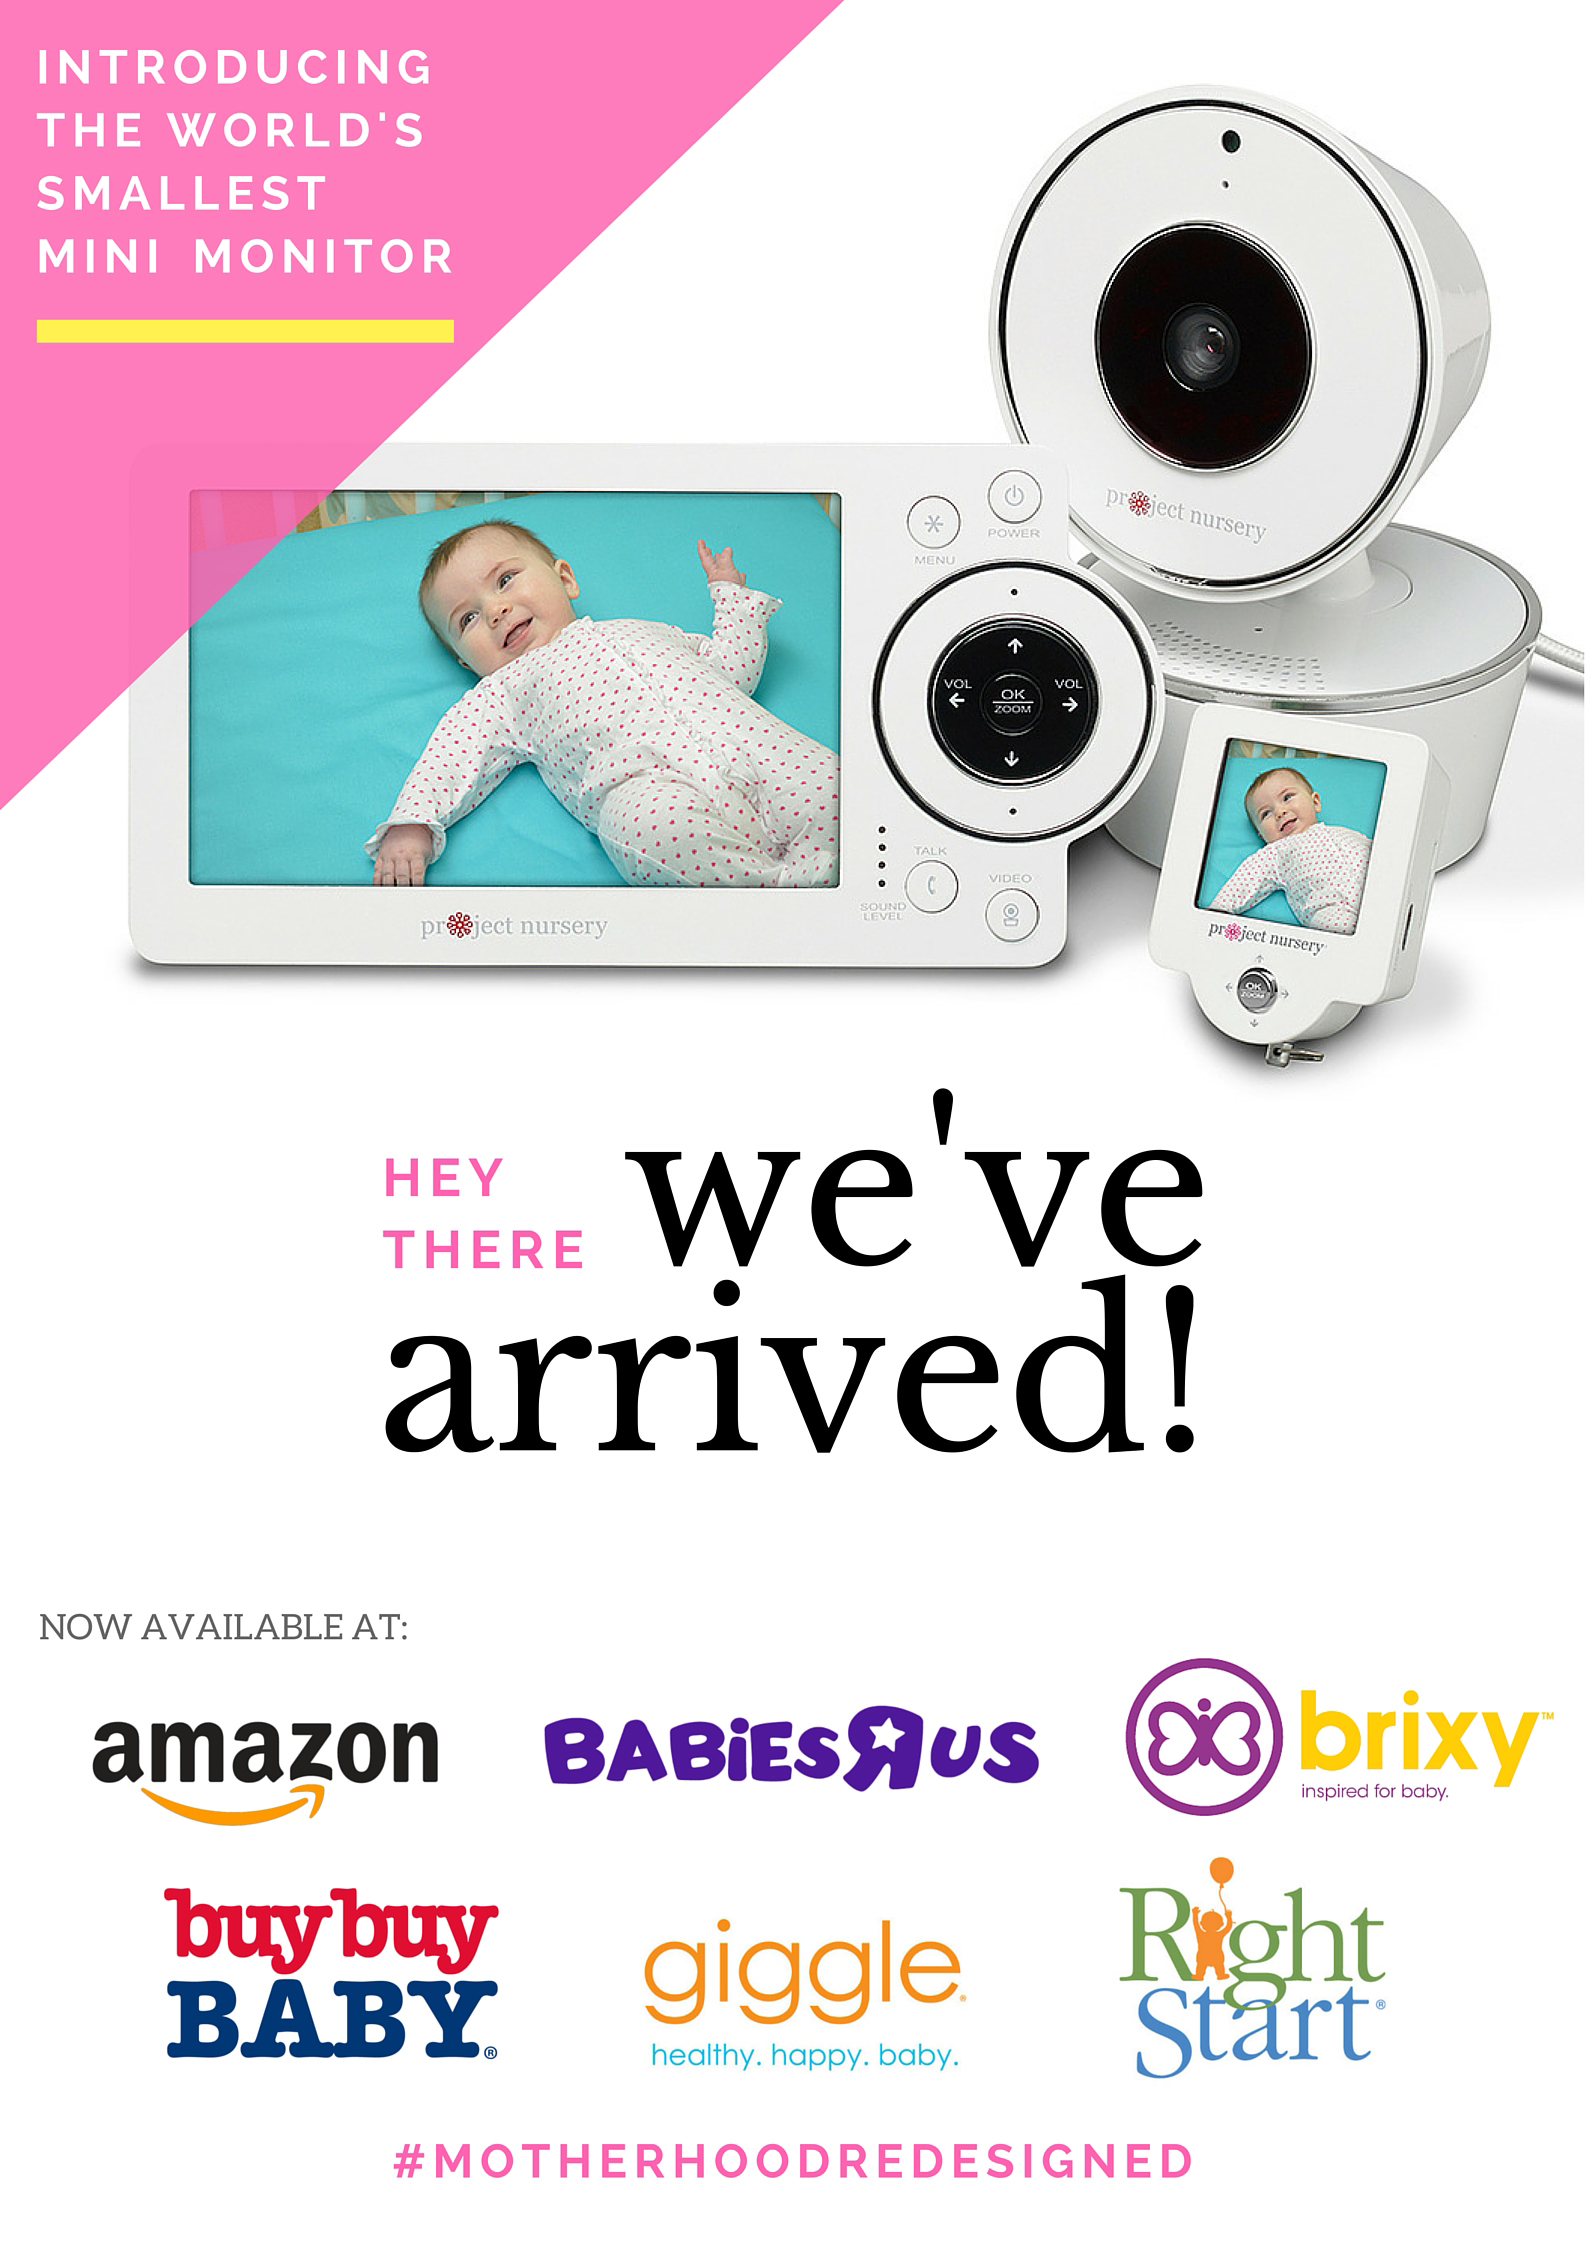 The Project Nursery Baby Monitor